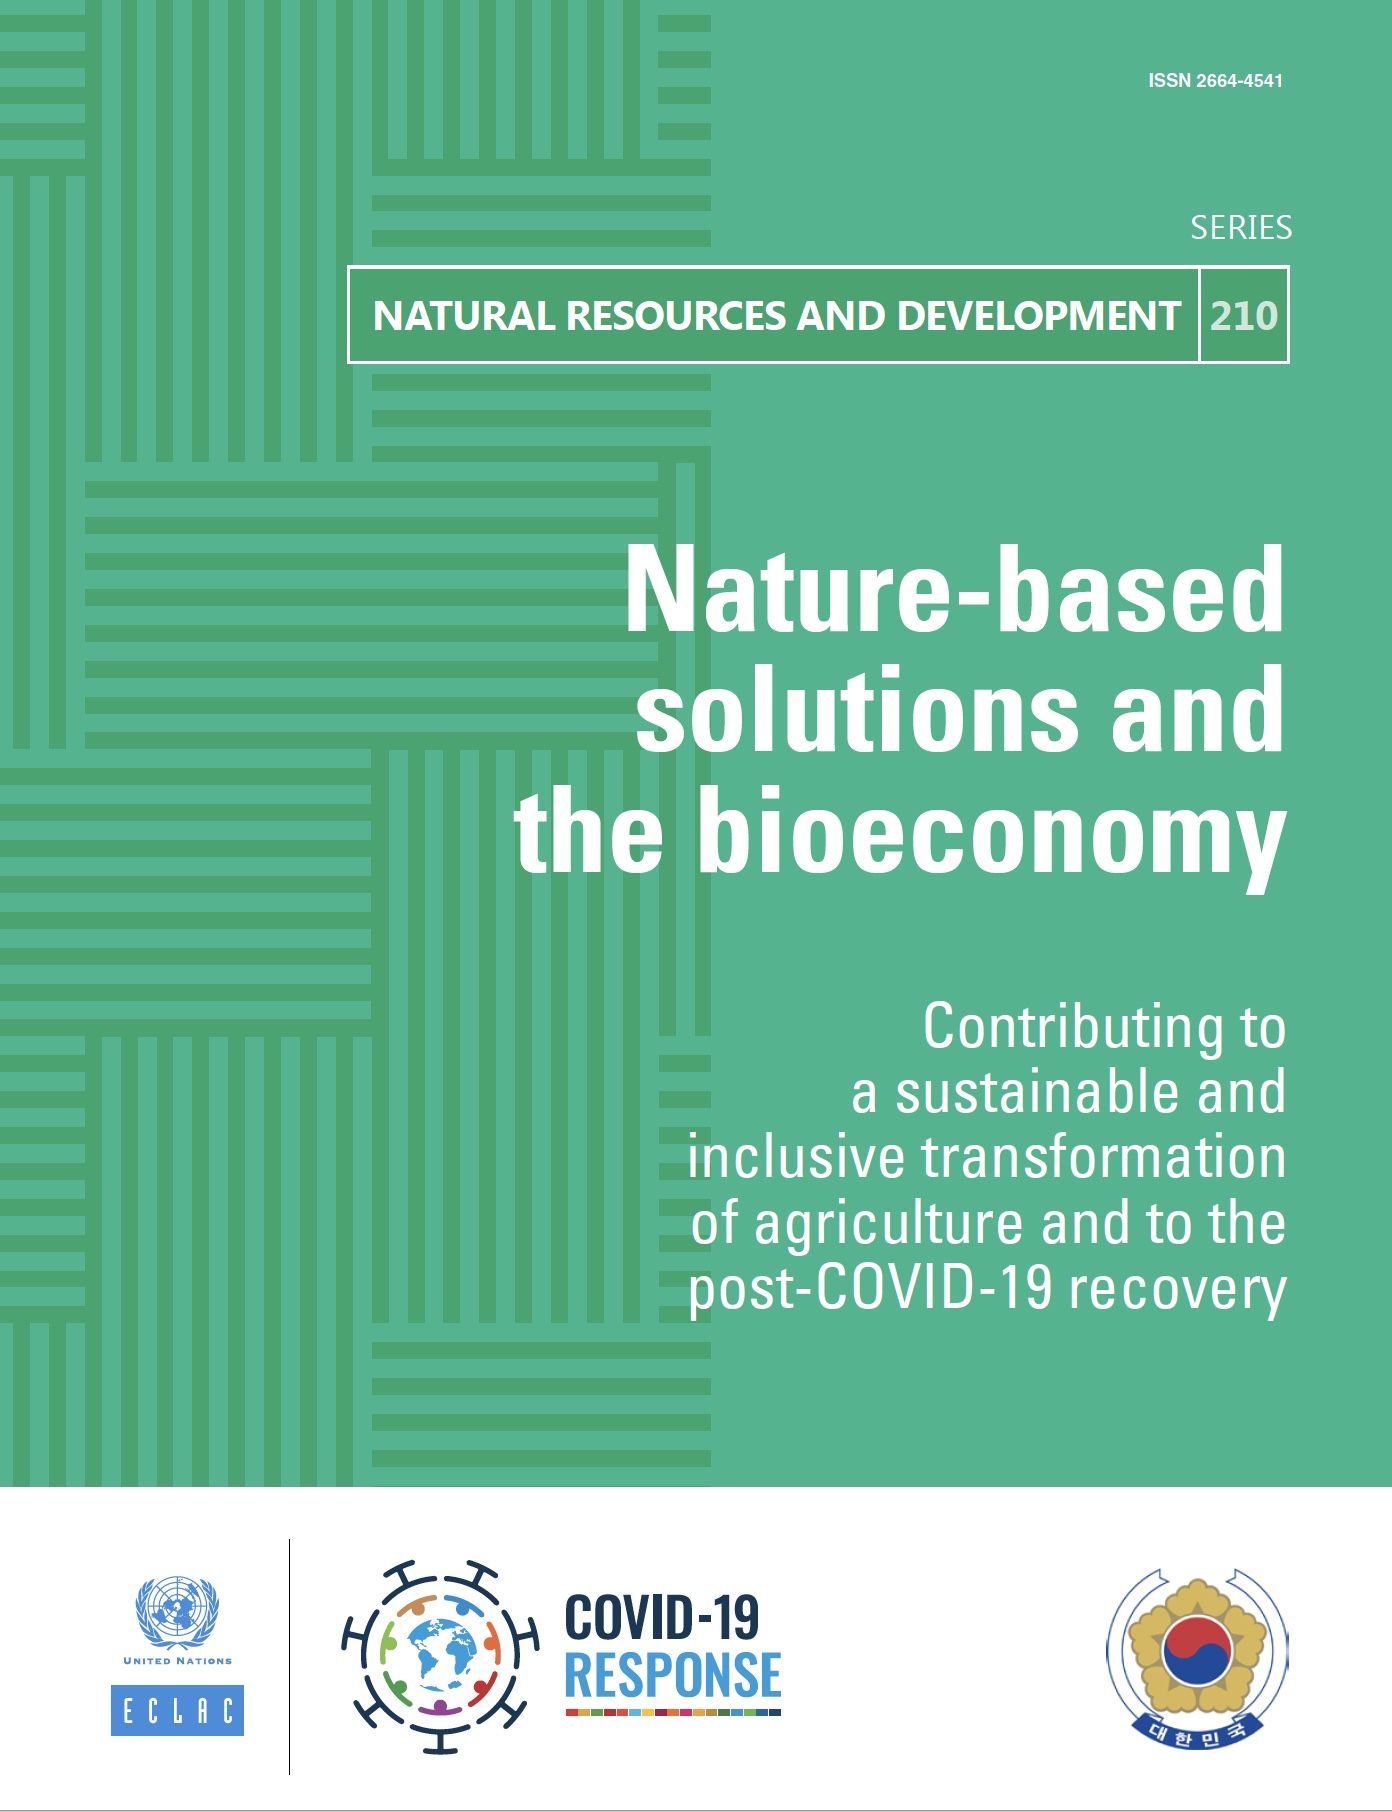 Nature-based solutions and the bioeconomy: Contributing to a sustainable and inclusive transformation of agriculture and to the post-COVID-19 recovery